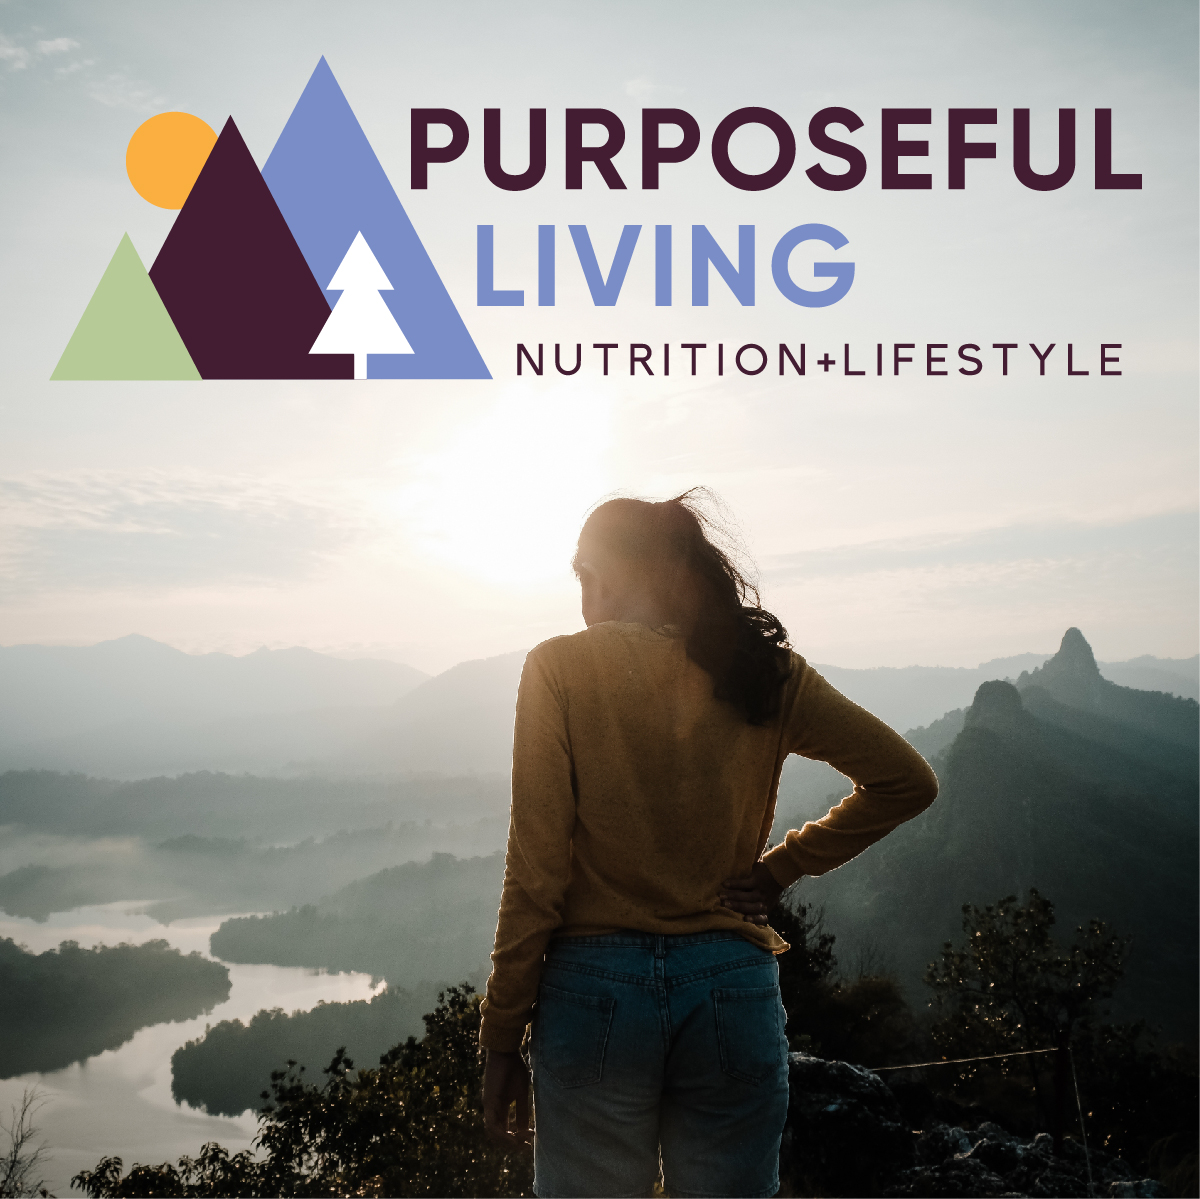 PURPOSEFUL LIVING by bl3nd design graphic design agency in abbotsford british columbia canada